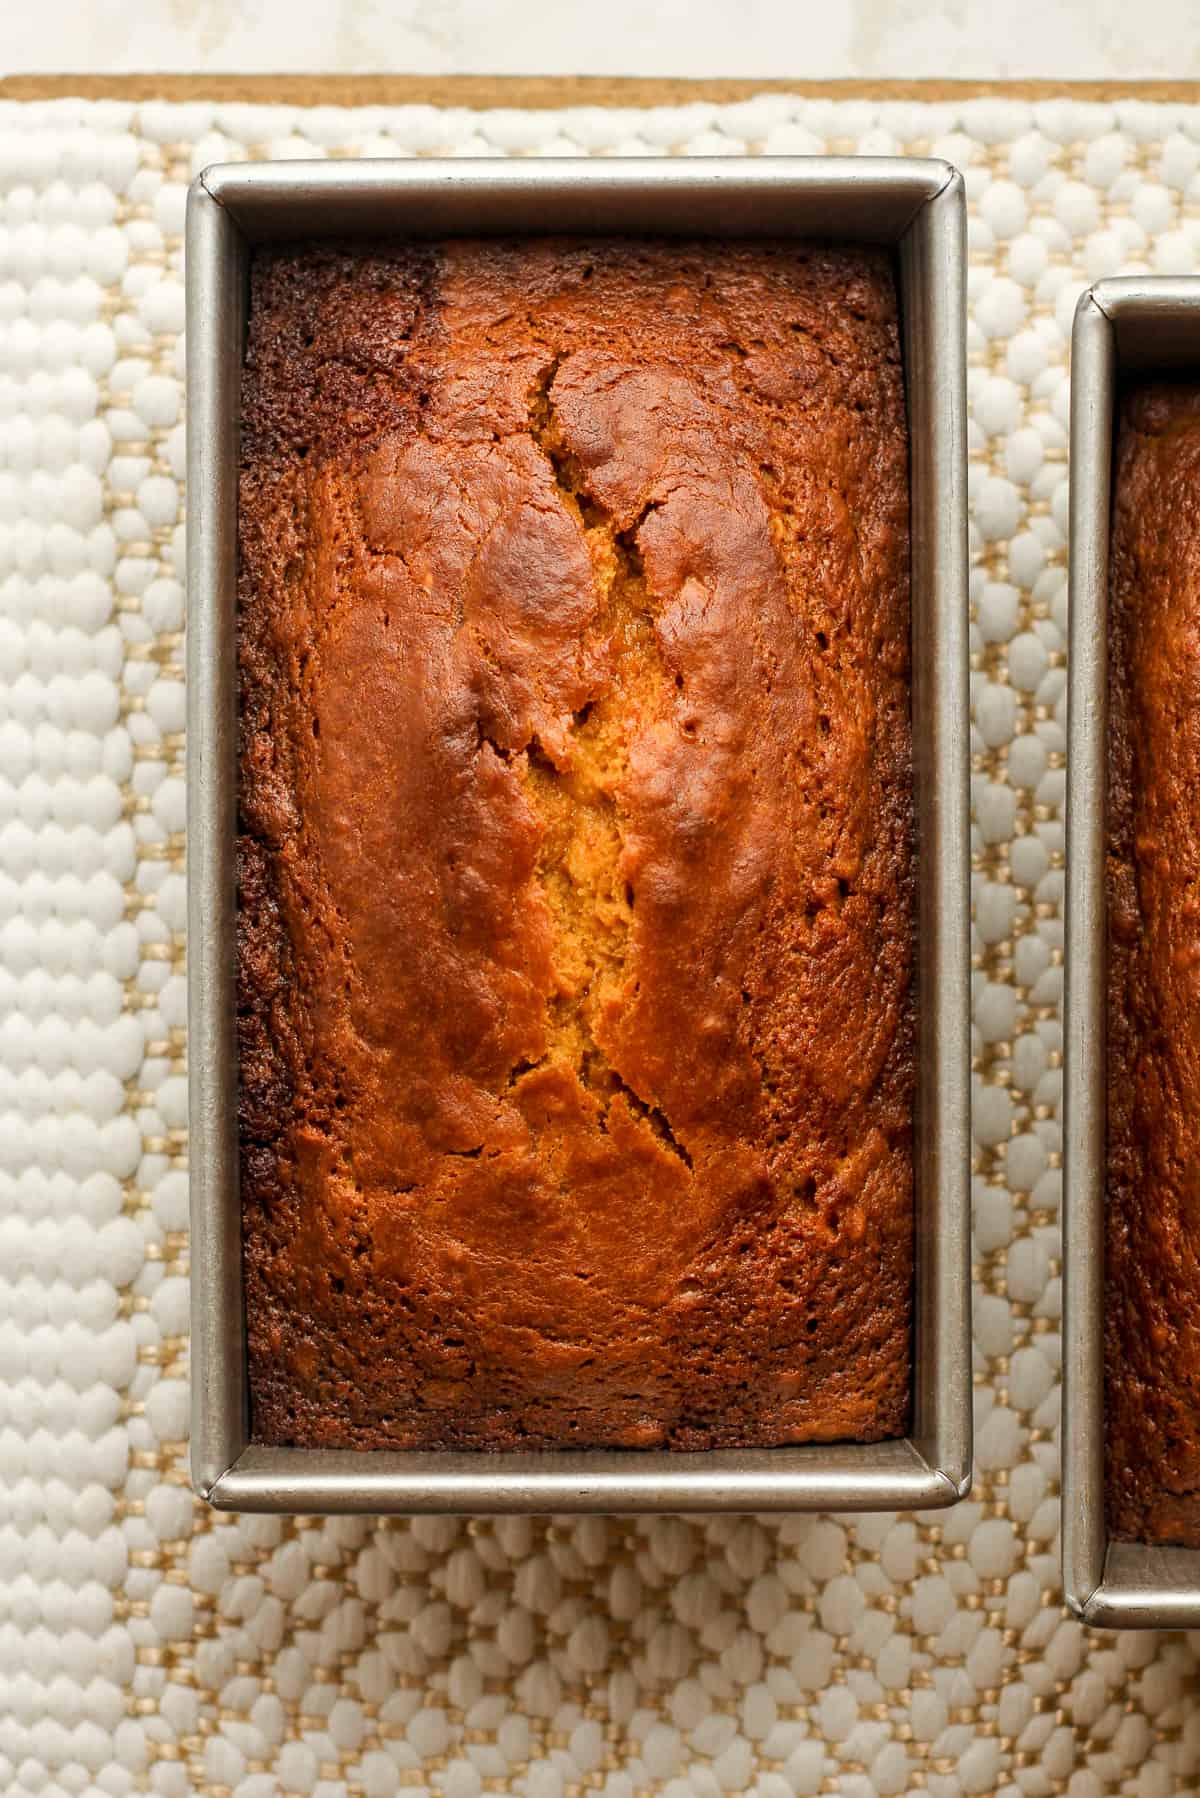 Two baked pumpkin loaves in pans.